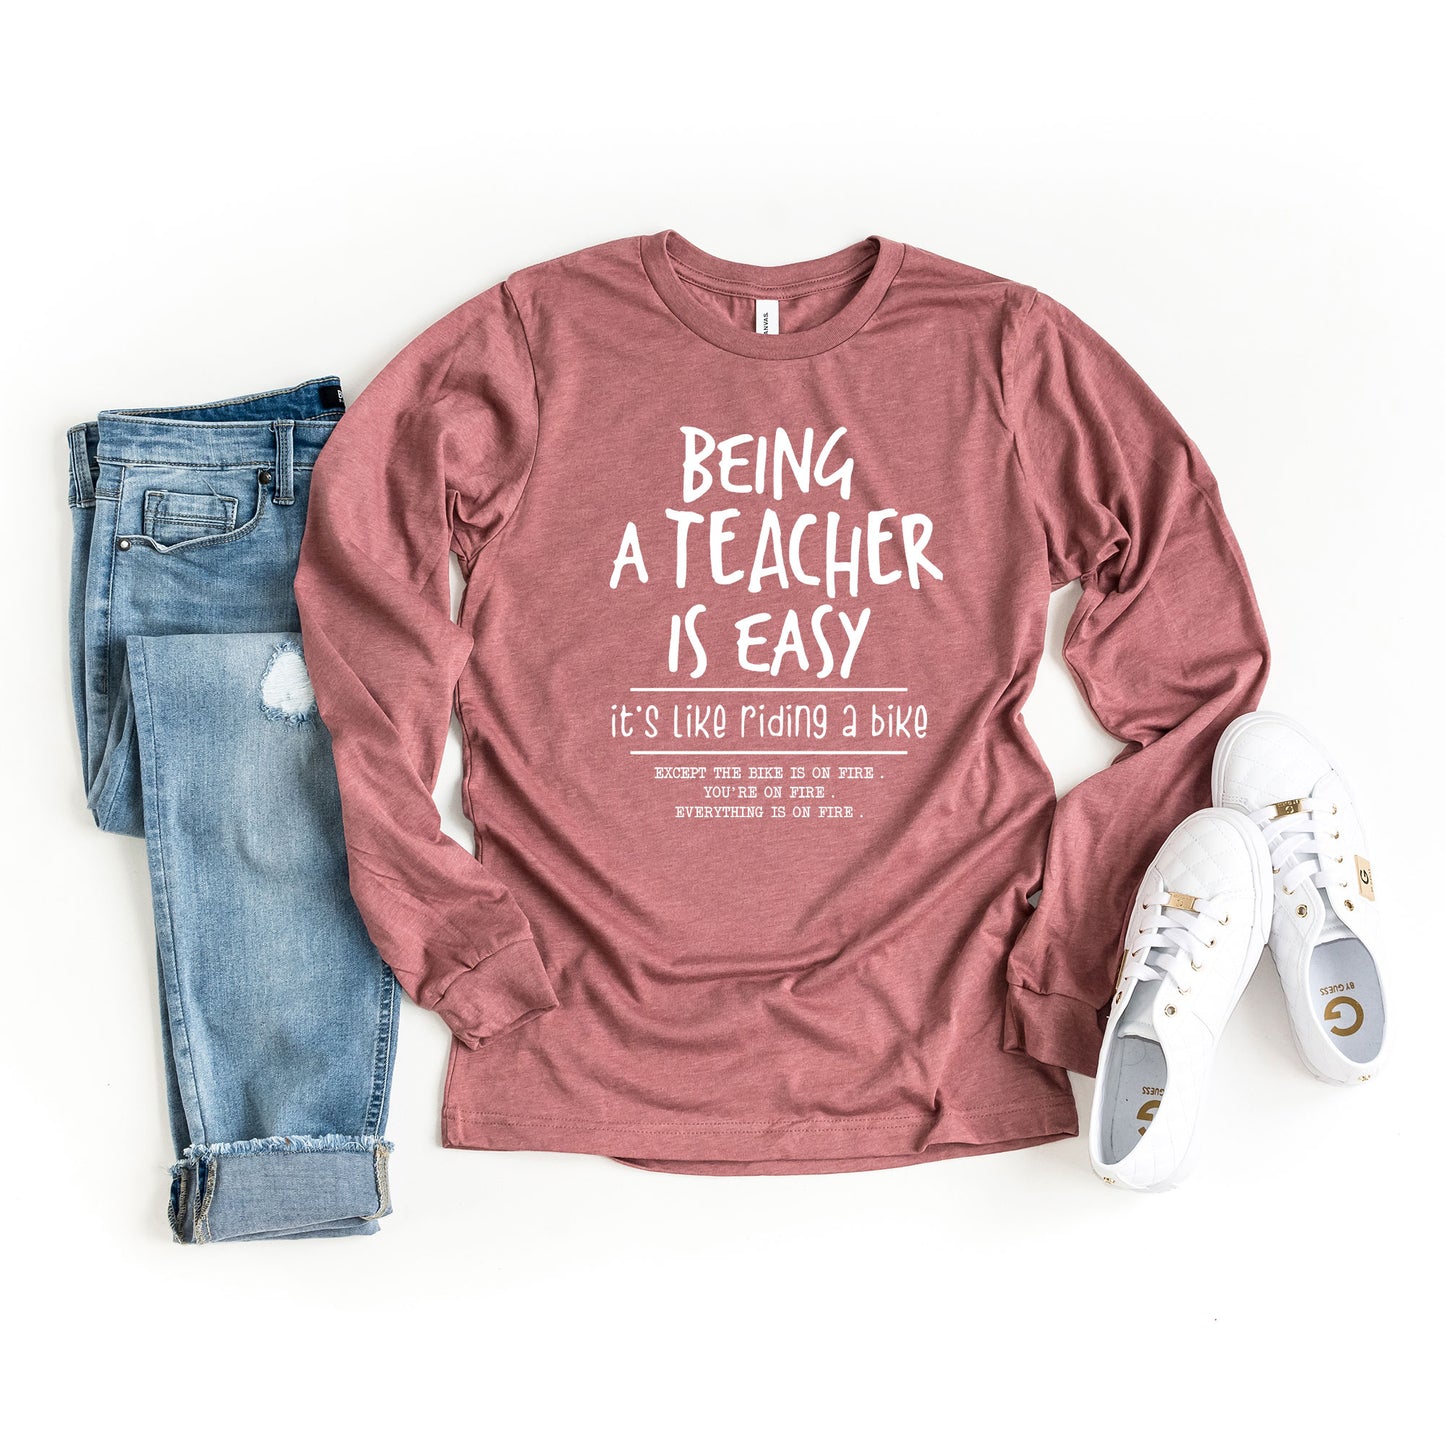 Being A Teacher Is Easy | Long Sleeve Crew Neck